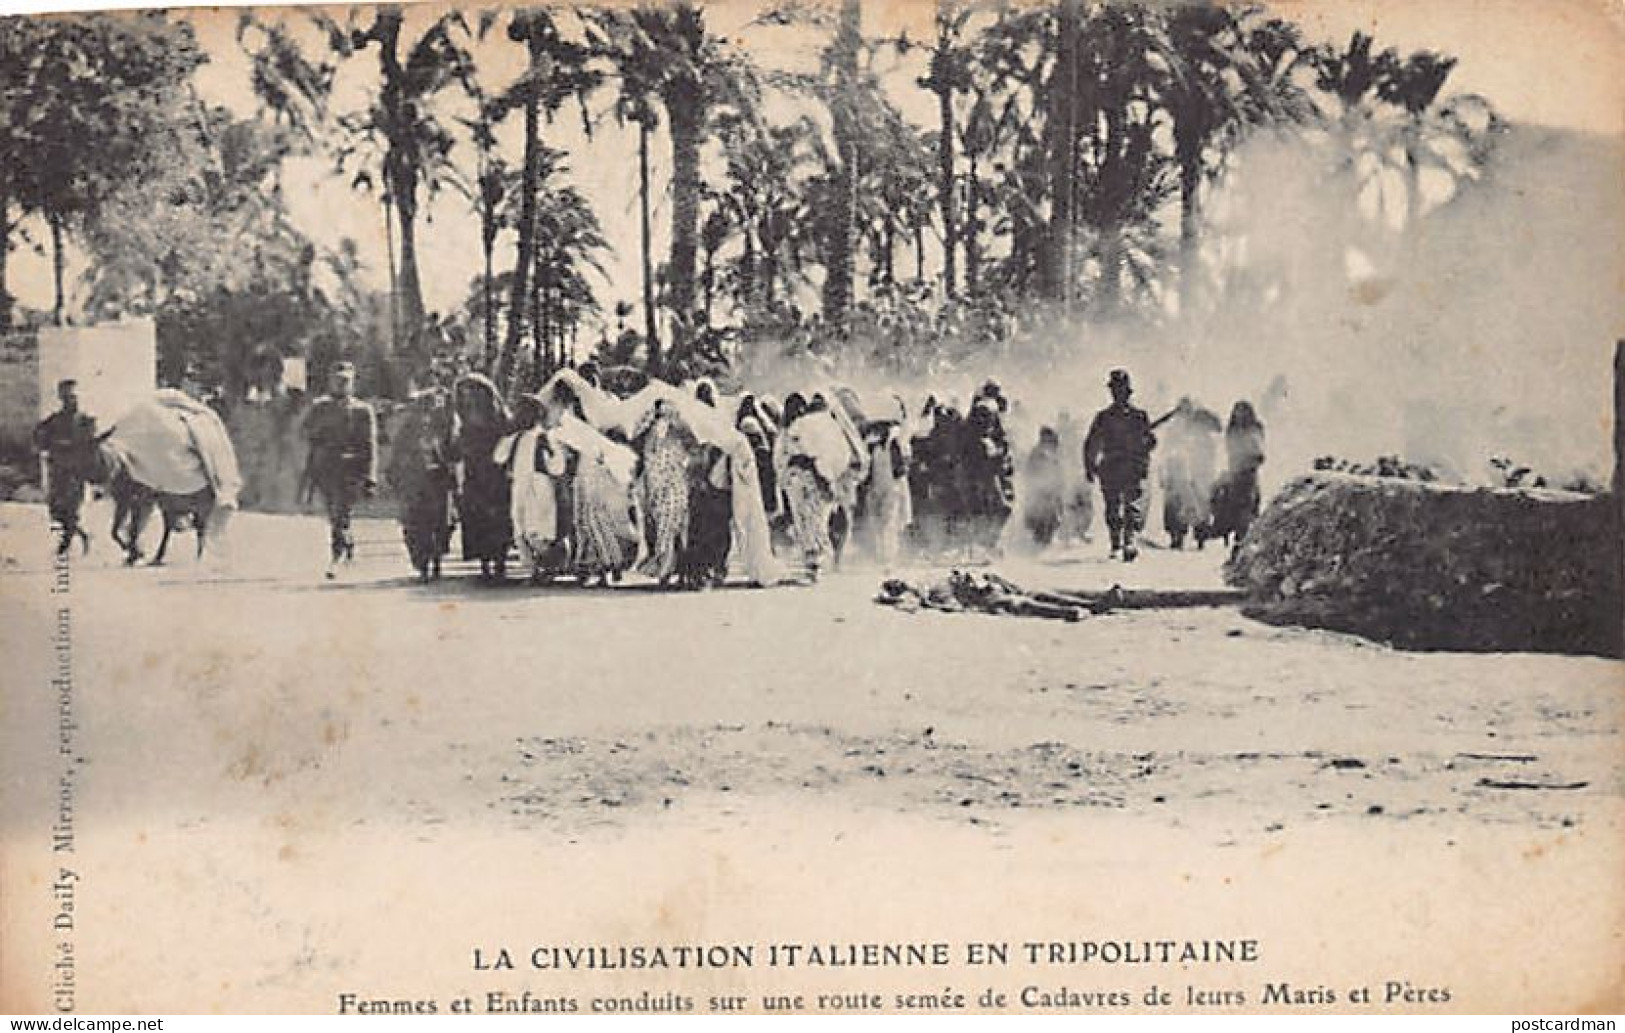 Libya - Italian Civilization In Tripolitania - Women And Children Led On A Road Strewn With The Corpses Of Their Husband - Libya